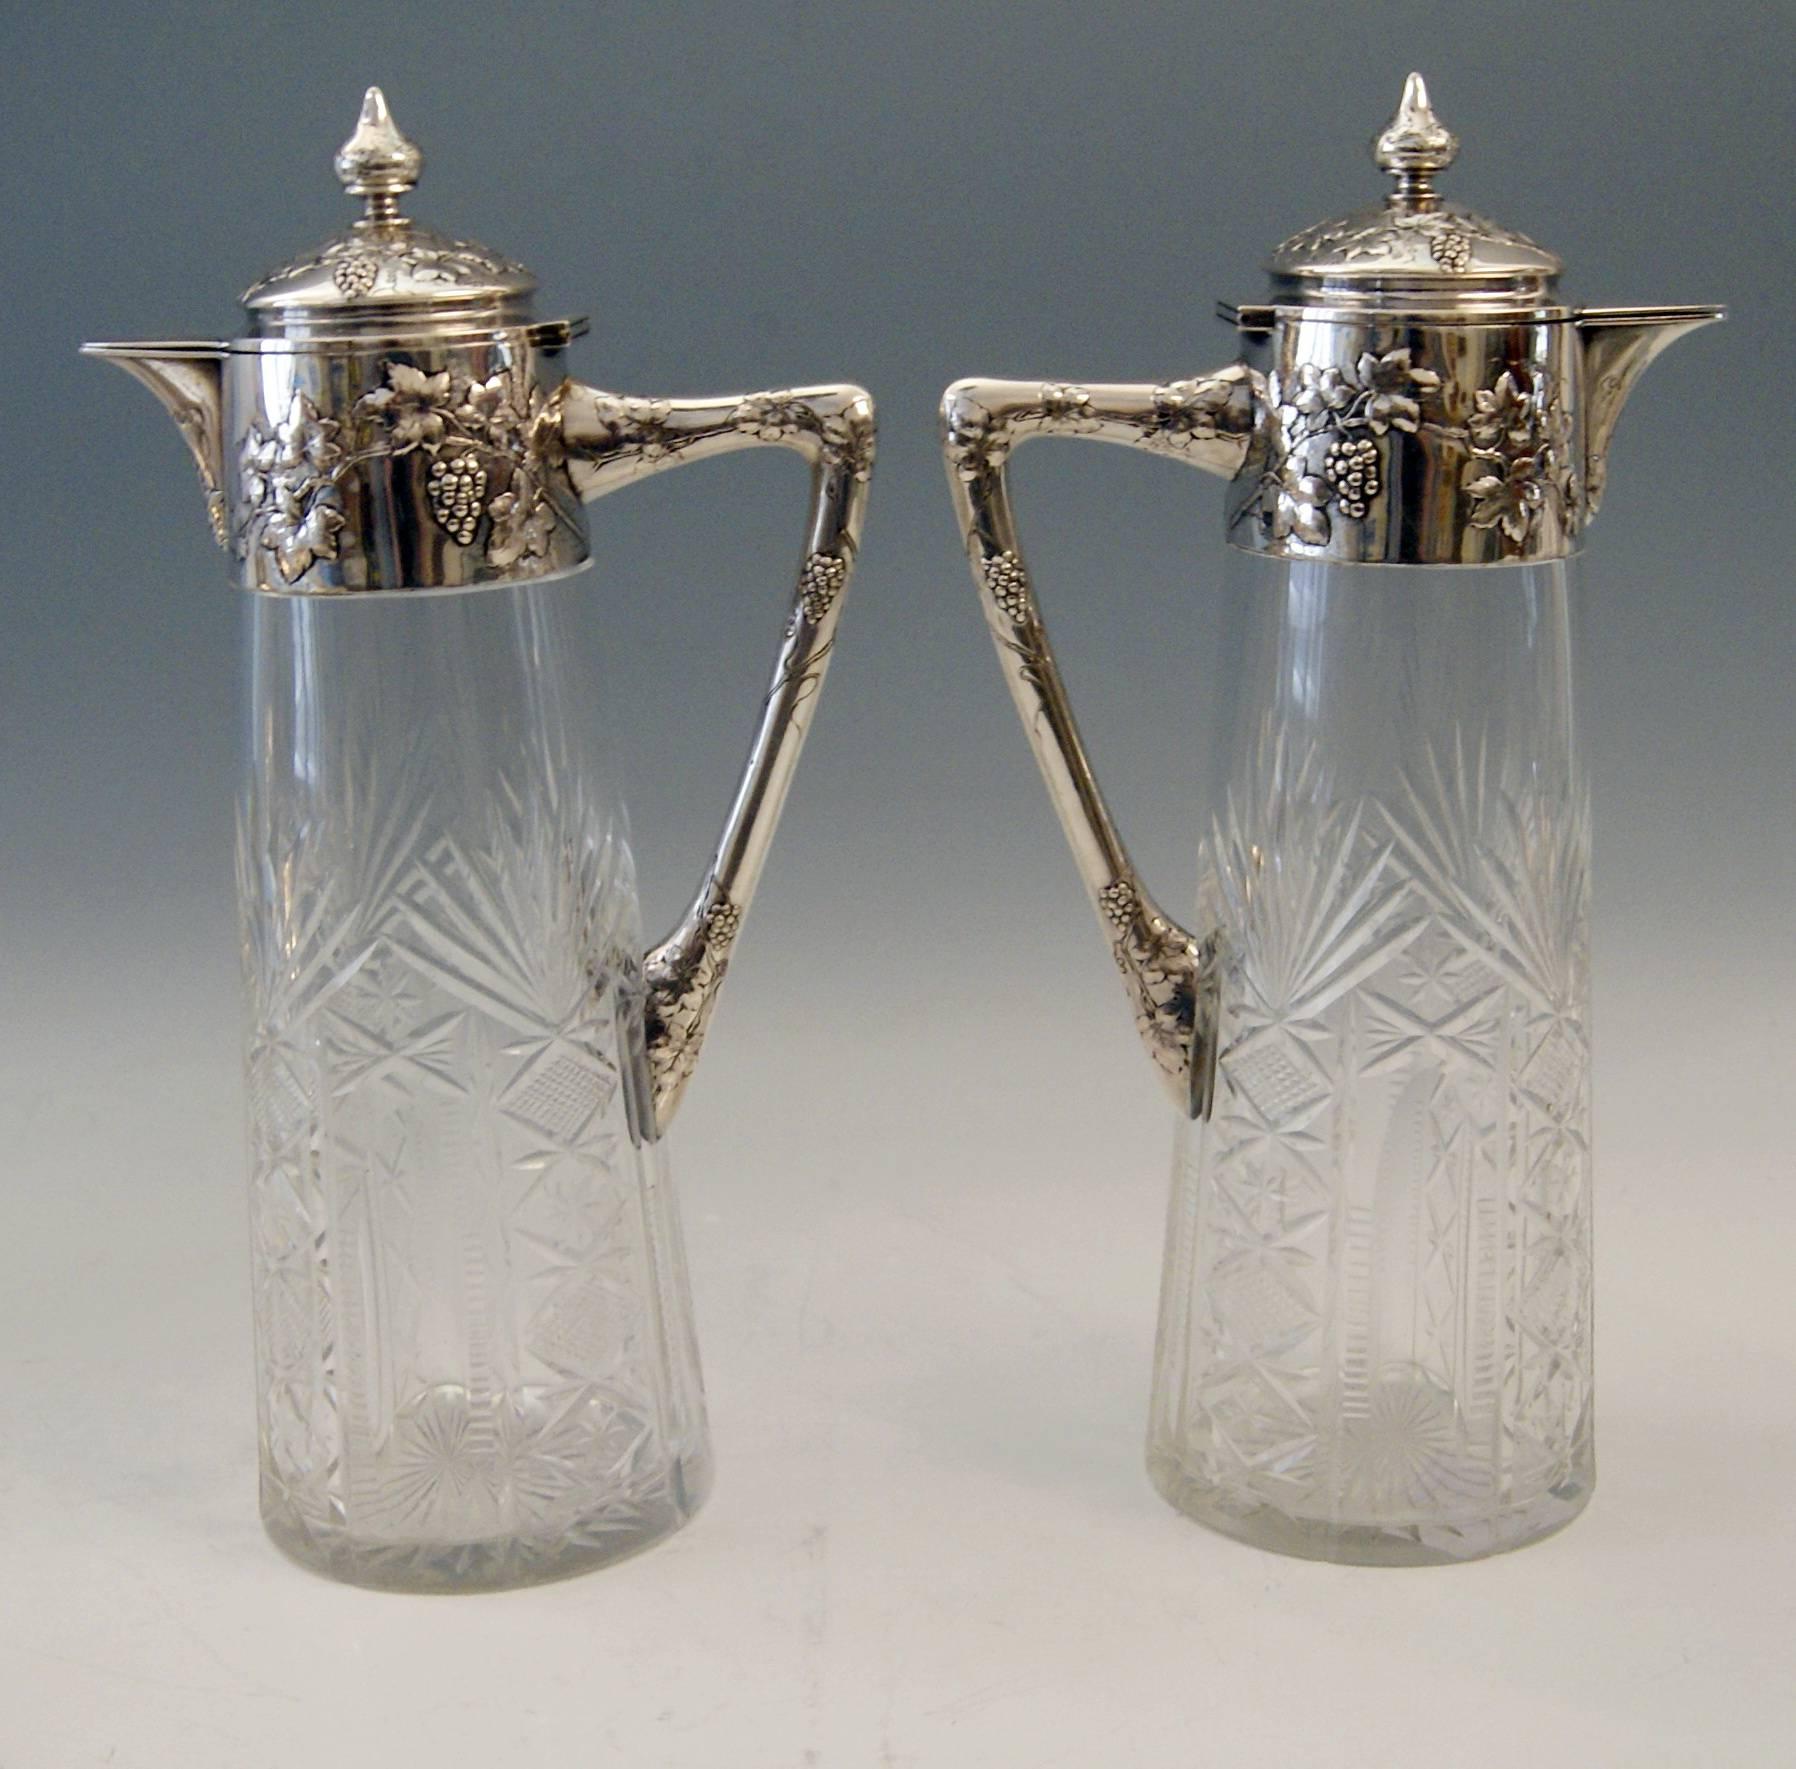 A pair of glass decanters (Carafes) with gorgeous silver mountings. 
Art Nouveau period.

Hallmarked: 
SILVER 800 ( = Hallmarked) and glass (cut decorations).
Austrian official silver stamp: So-said Diana's Head Mark.
made circa 1900.